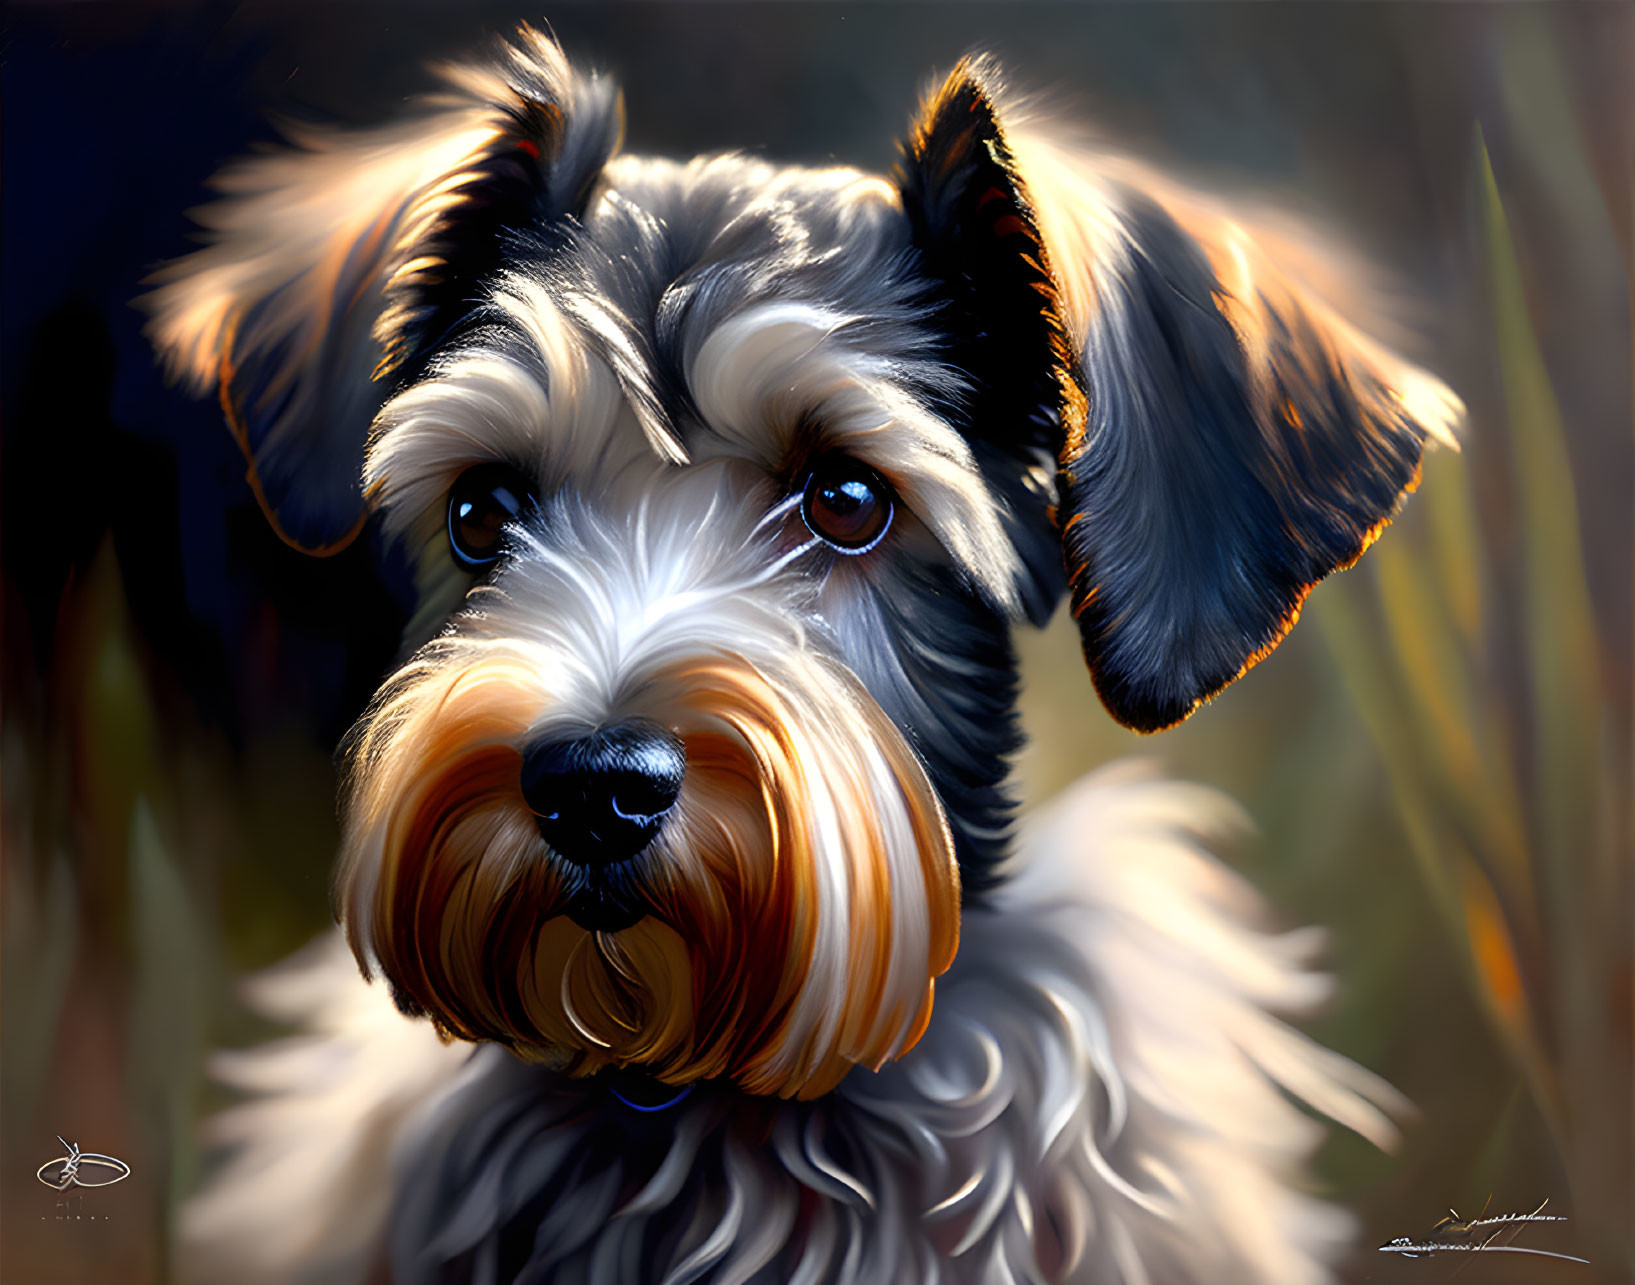 Detailed Digital Painting of Black and Tan Dog with Attentive Eyes